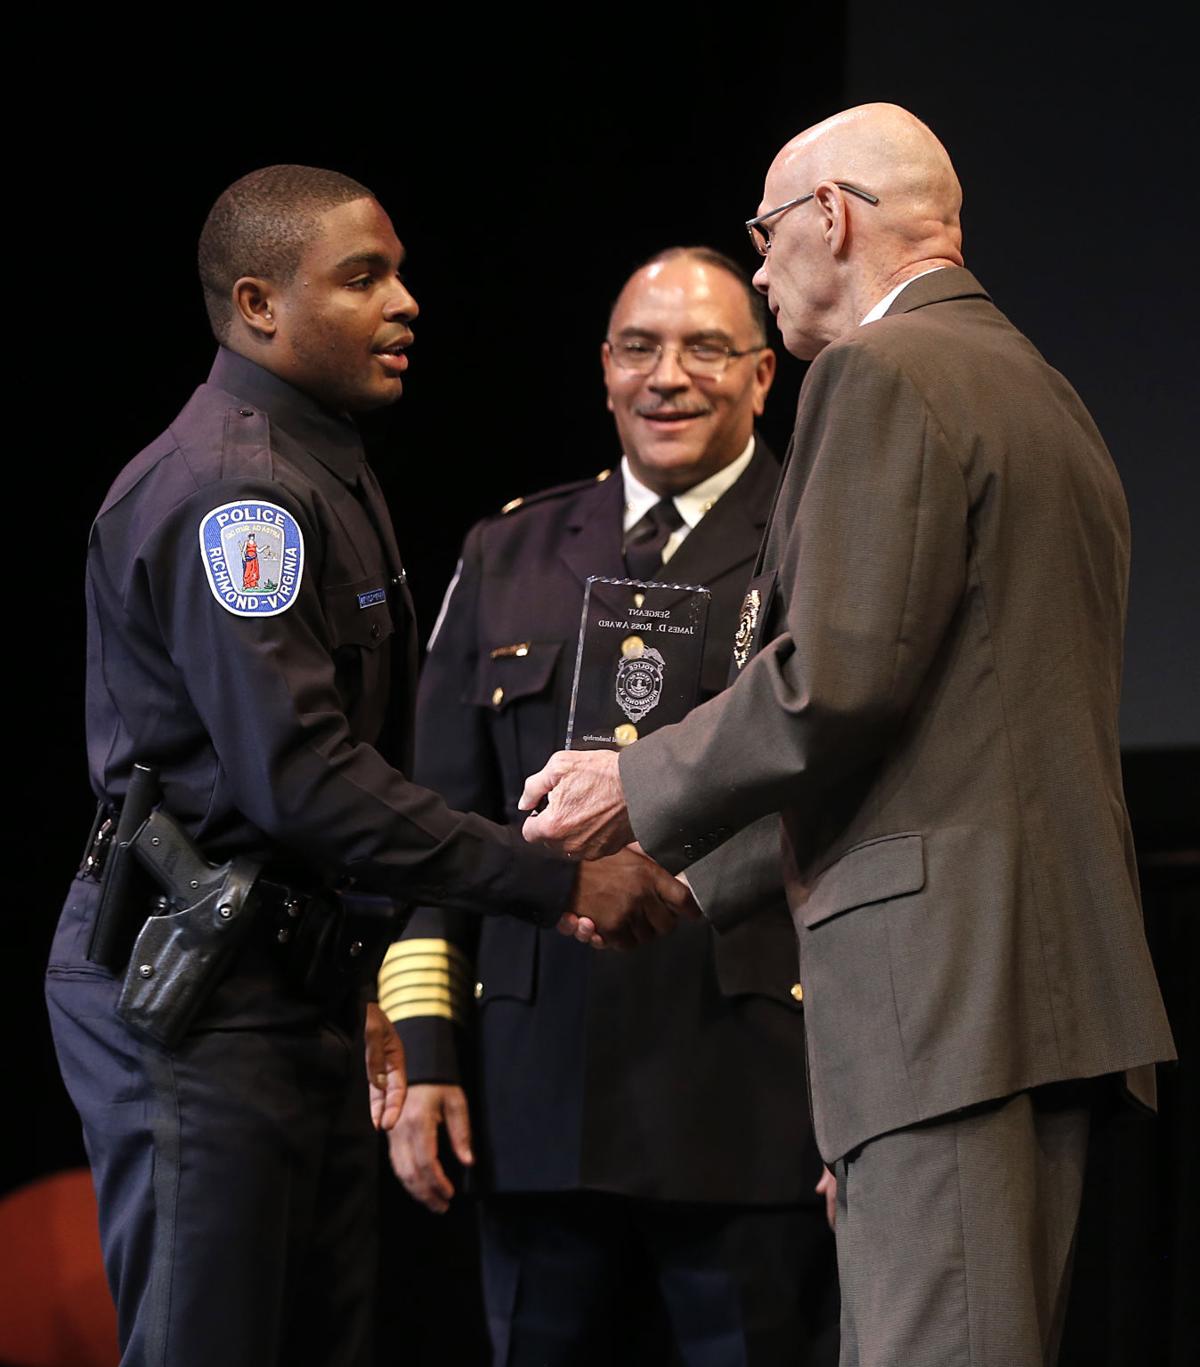 Richmond Police Department welcomes 18 new officers in times of growing ...